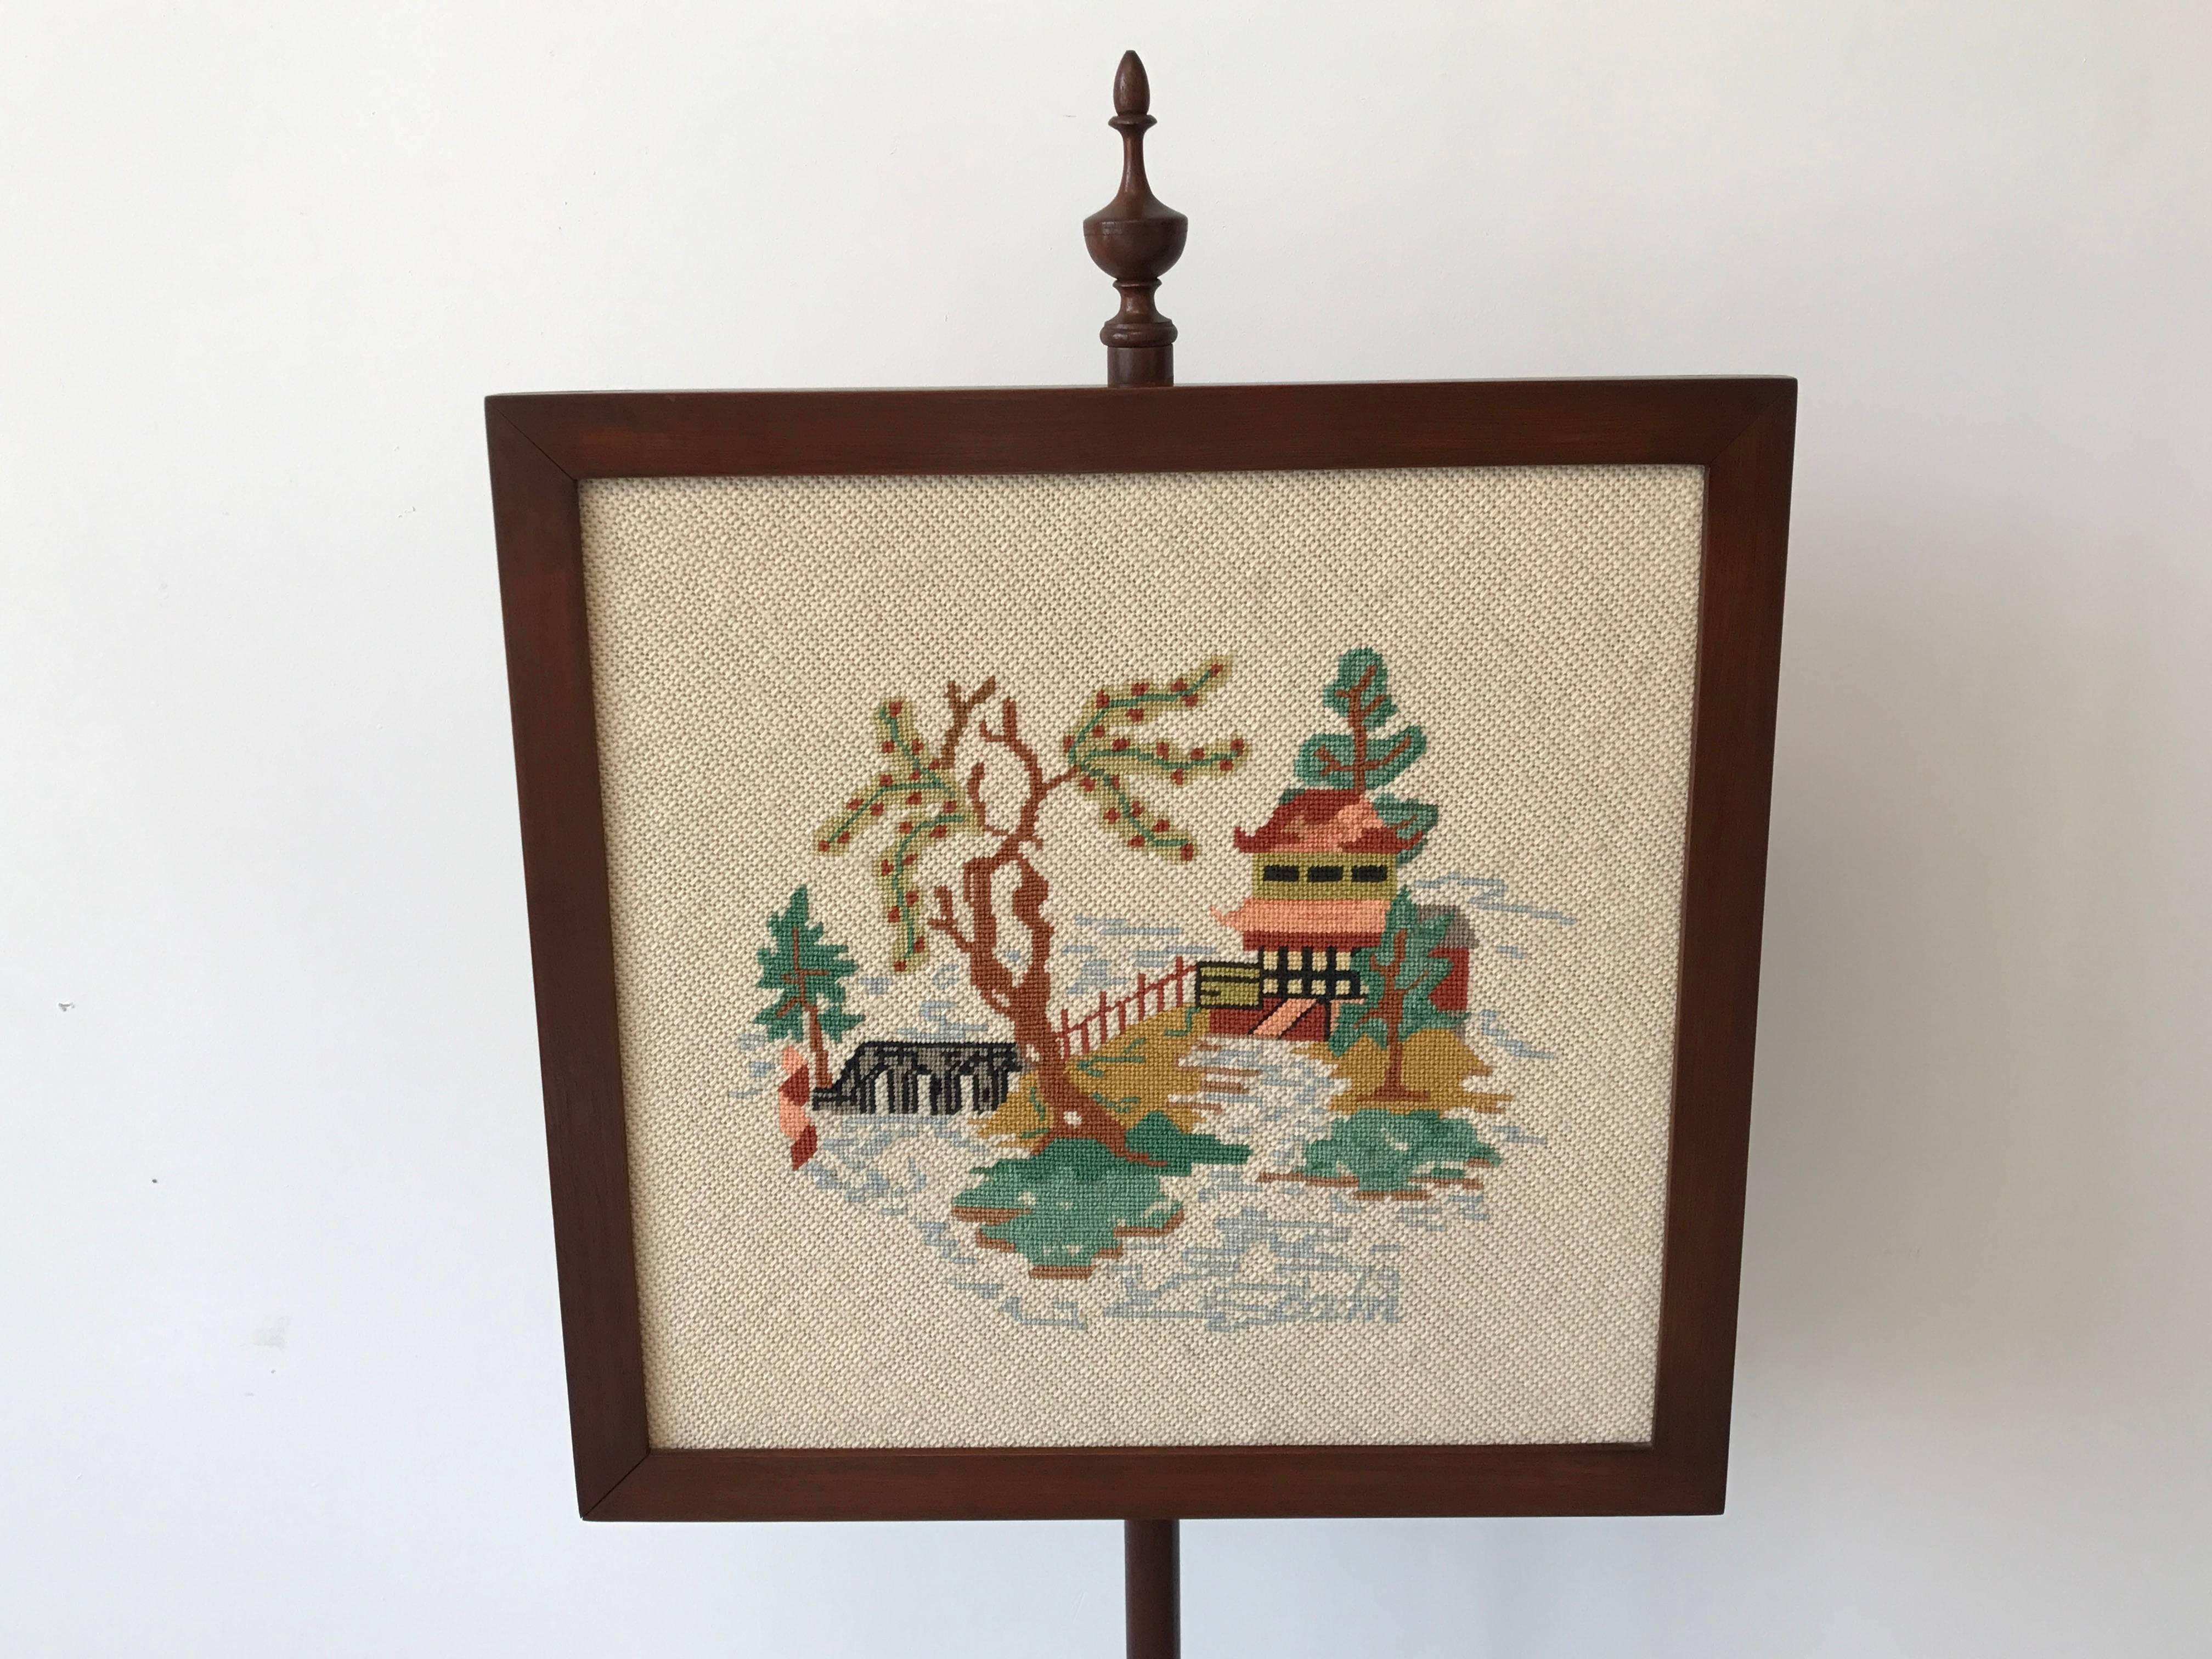 Offered is a gorgeous, 1970s chinoiserie needlepoint fire screen with an ornate pagoda motif. Signed, bottom right of needlepoint. Needlepoint is removable to hang as artwork. 

Needlepoint is 1